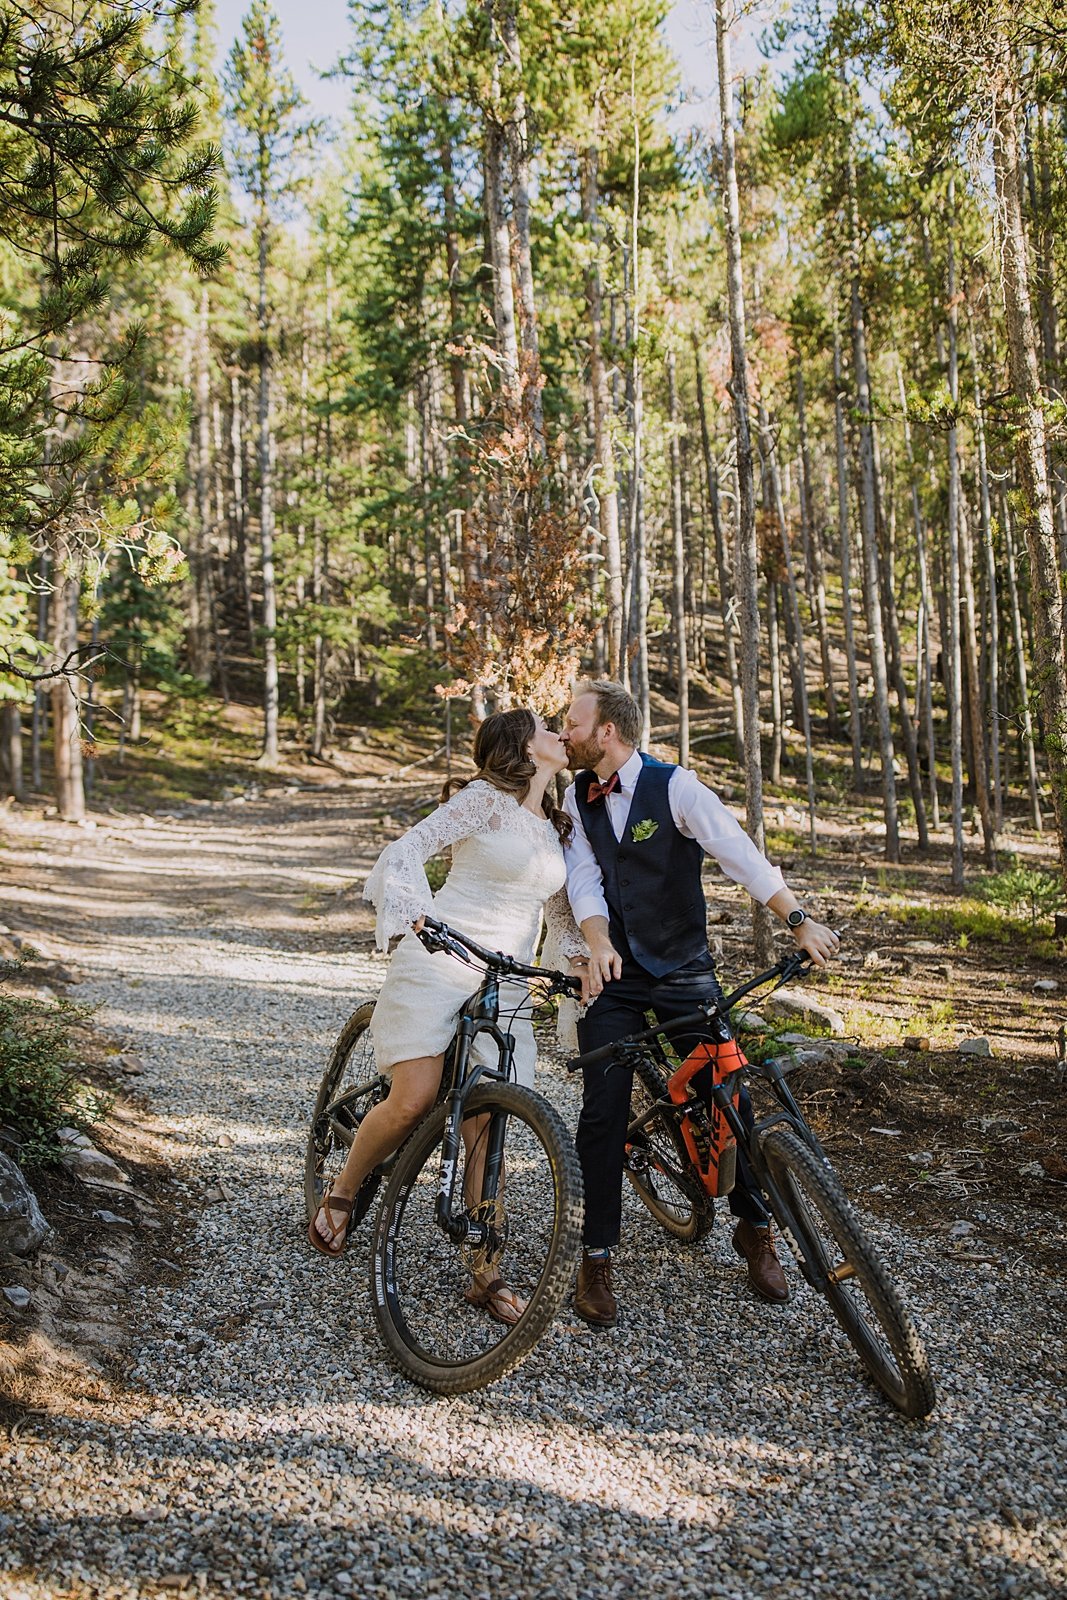 bride and groom riding bikes in wedding attire, mountain biking on your wedding day, couple mountain biking, breckenridge airbnb wedding, breckenridge mountain bike wedding, burnt orange bowtie